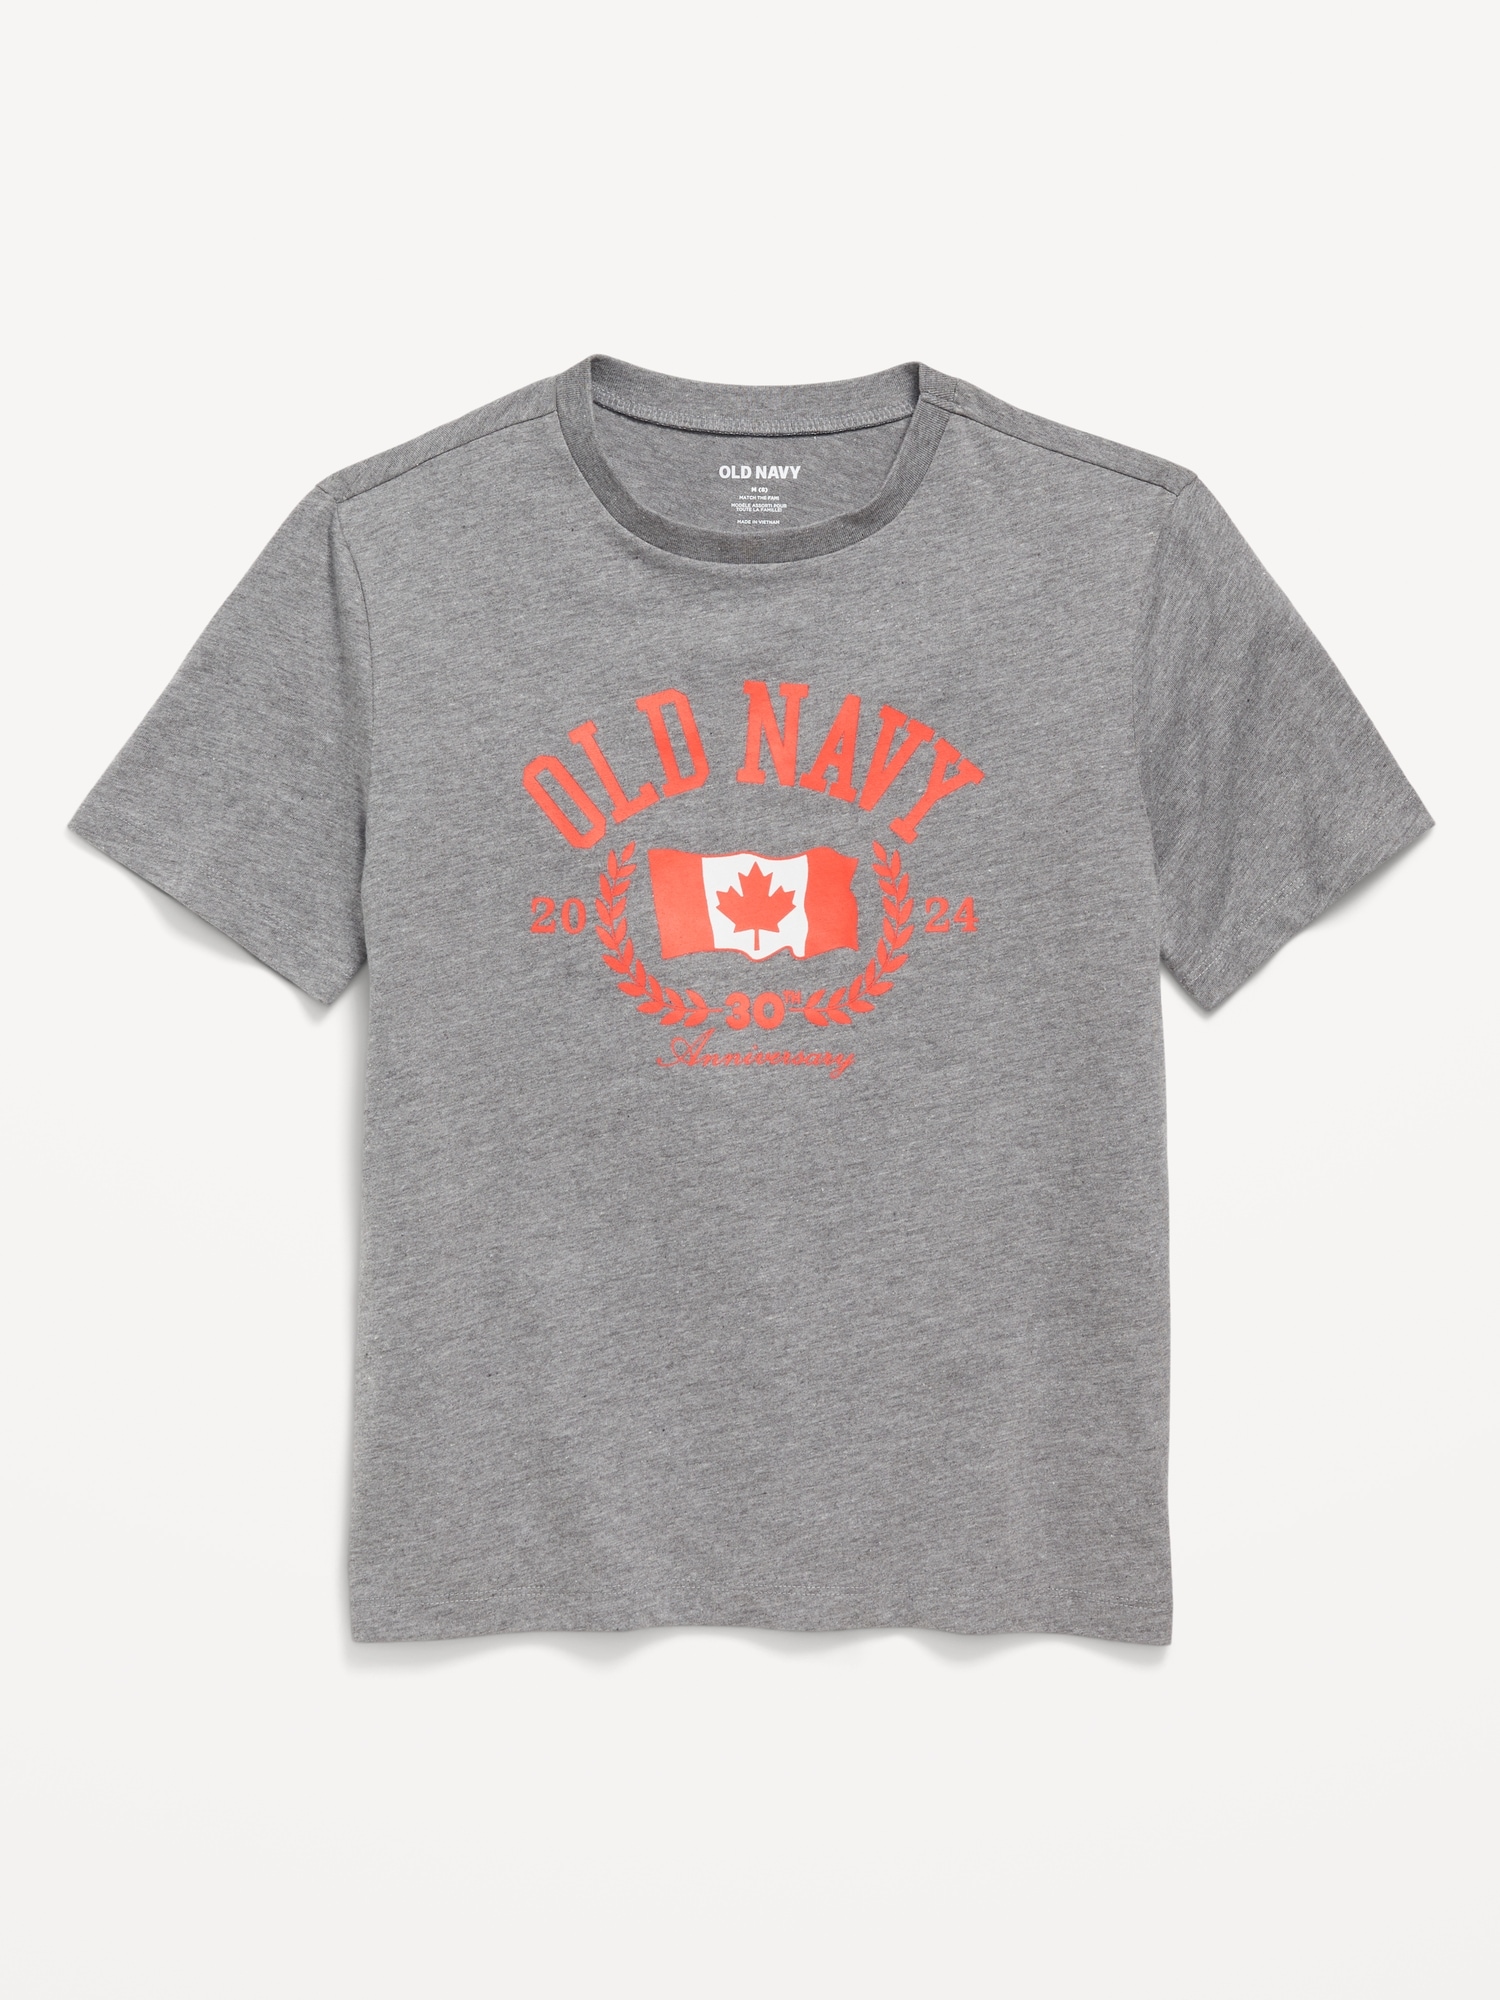 Matching Gender-Neutral Logo-Graphic T-Shirt for Kids